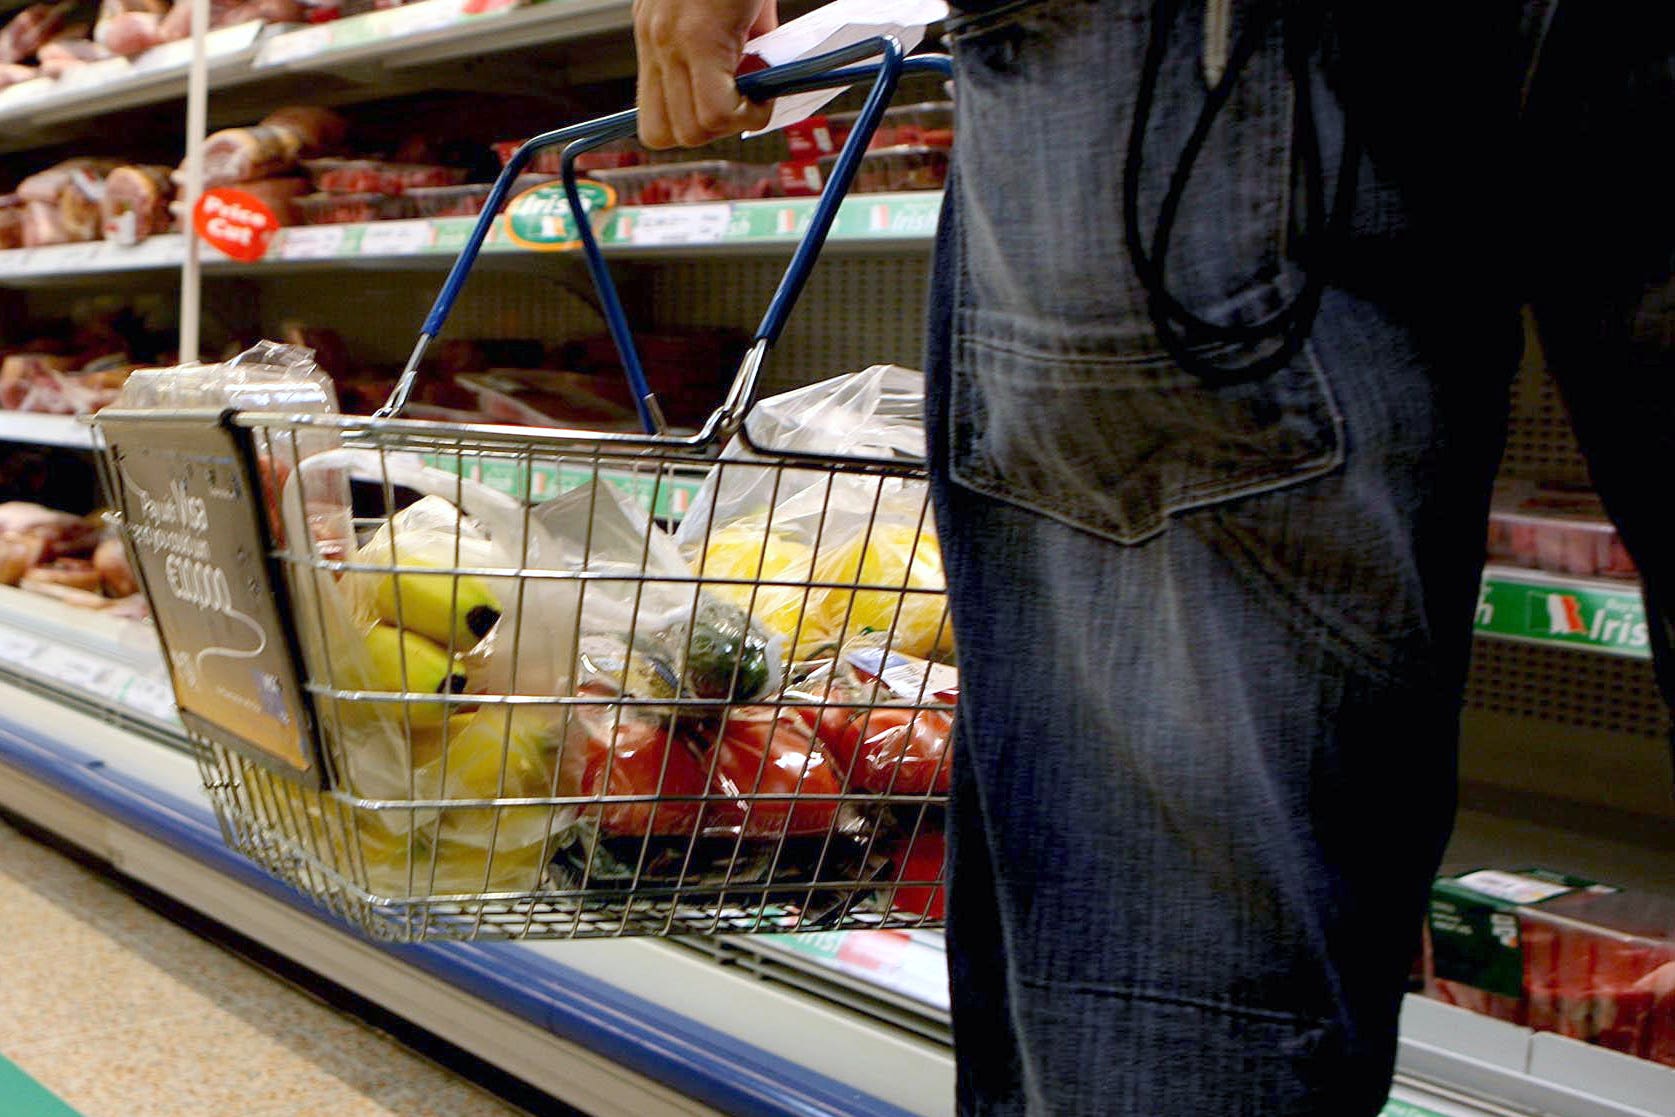 Inflation eased slightly last month but cost pressures remained intense for cash-strapped households as food prices hit another 45-year high